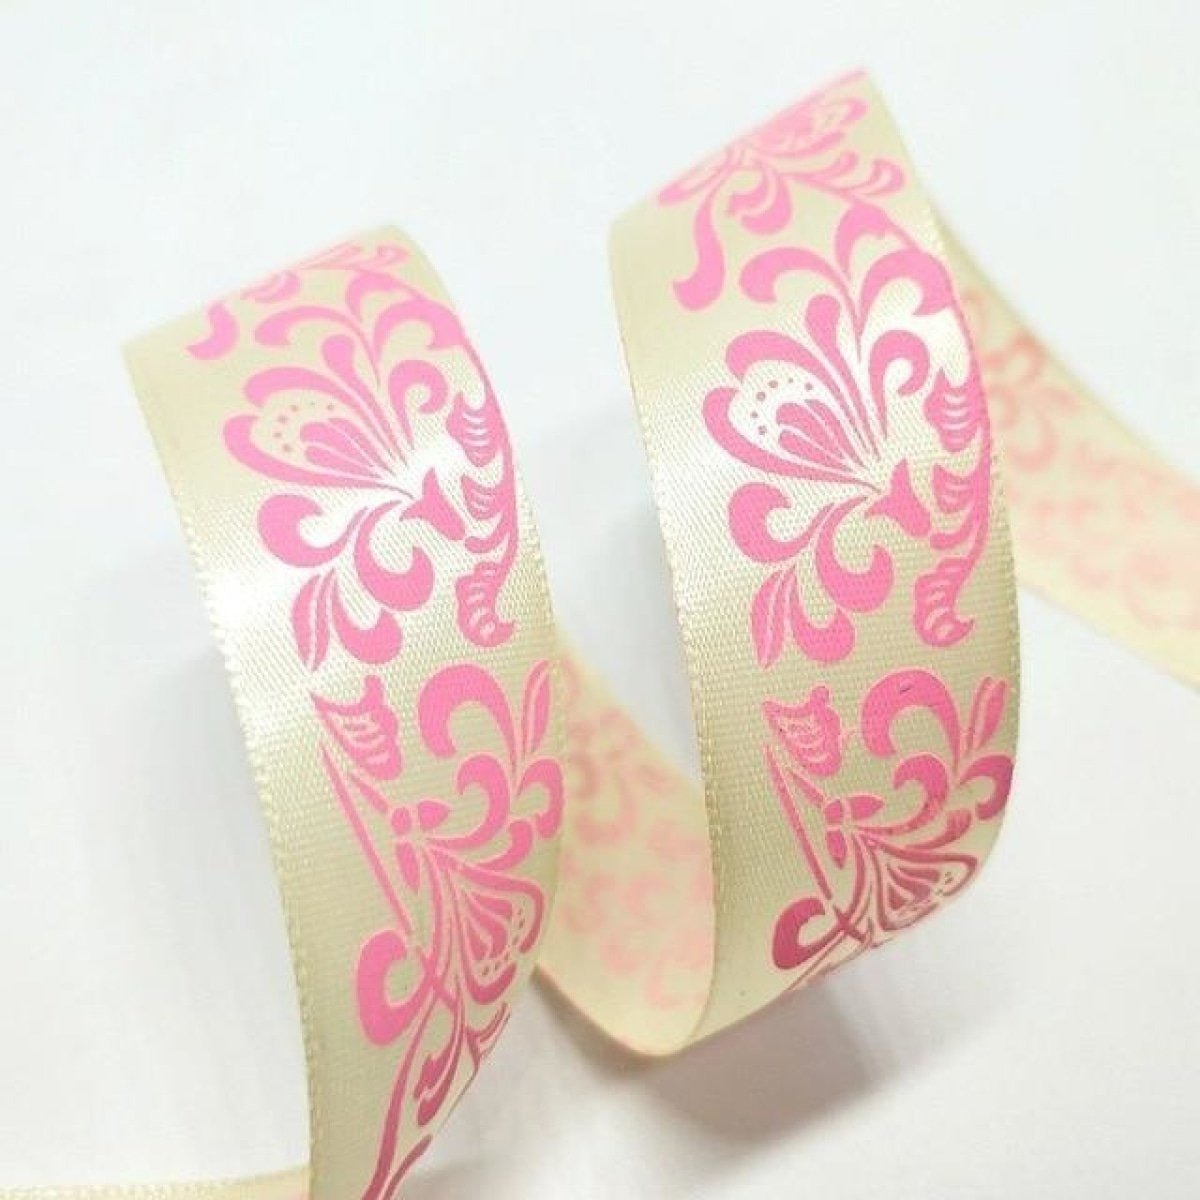 5M Polyester Ribbons 25Mm Diy Gift Wrapping Hair Accessories Sewing Bow Wedding Decorations Pink And